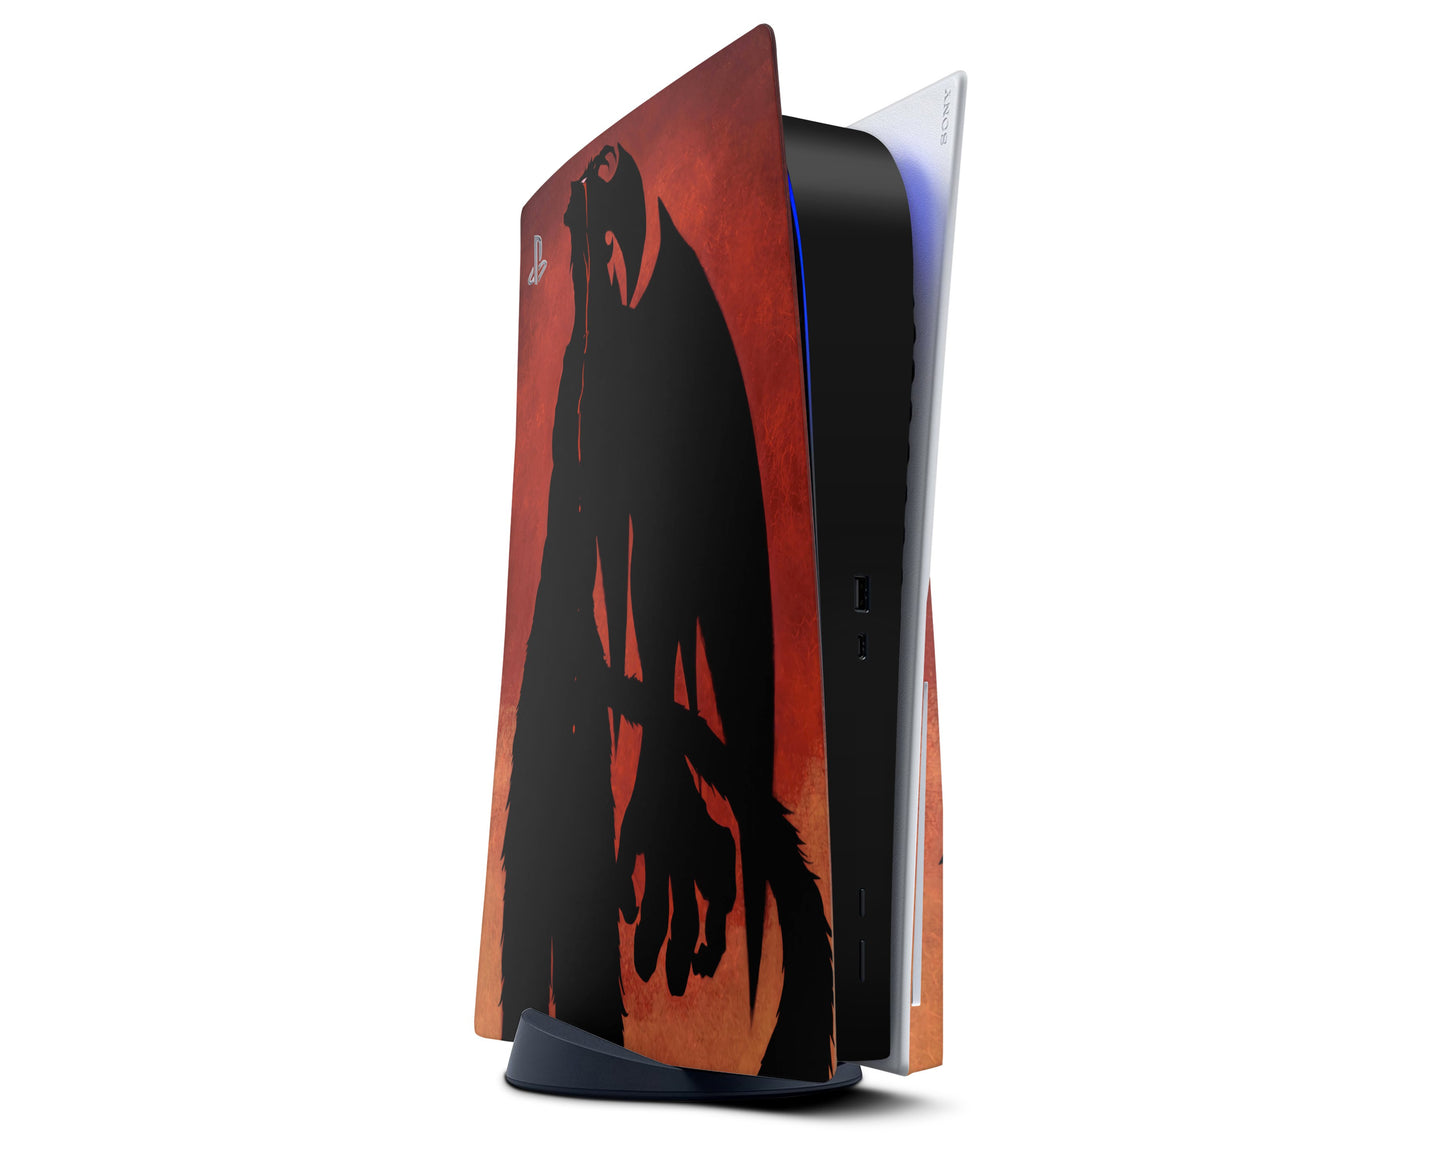 Anime Town Creations PS5 Devilman Crybaby Red PS5 Skins - Anime Devilman Crybaby PS5 Skin